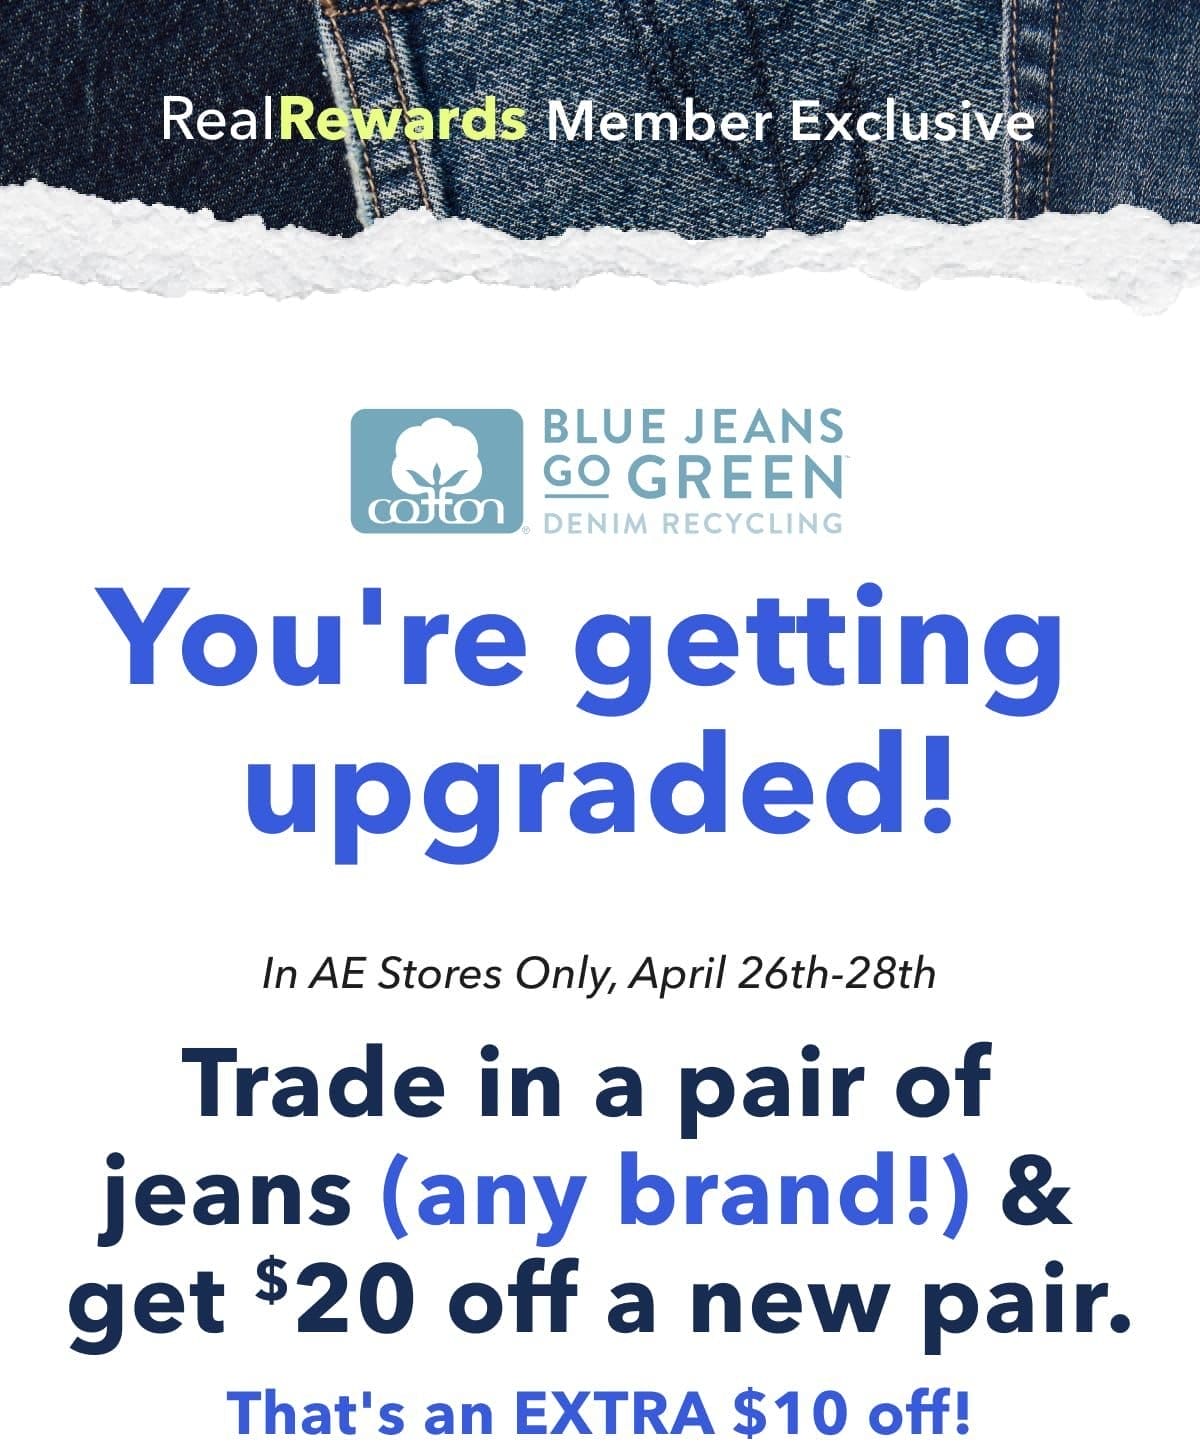 Real Rewards Member Exclusive | Blue Jeans Go Green | You're getting upgraded! In AE Stores Only, April 26th-28th | Trade in a pair of jeans (any brand!) & get \\$20 off a new pair. That's an EXTRA \\$10 off!